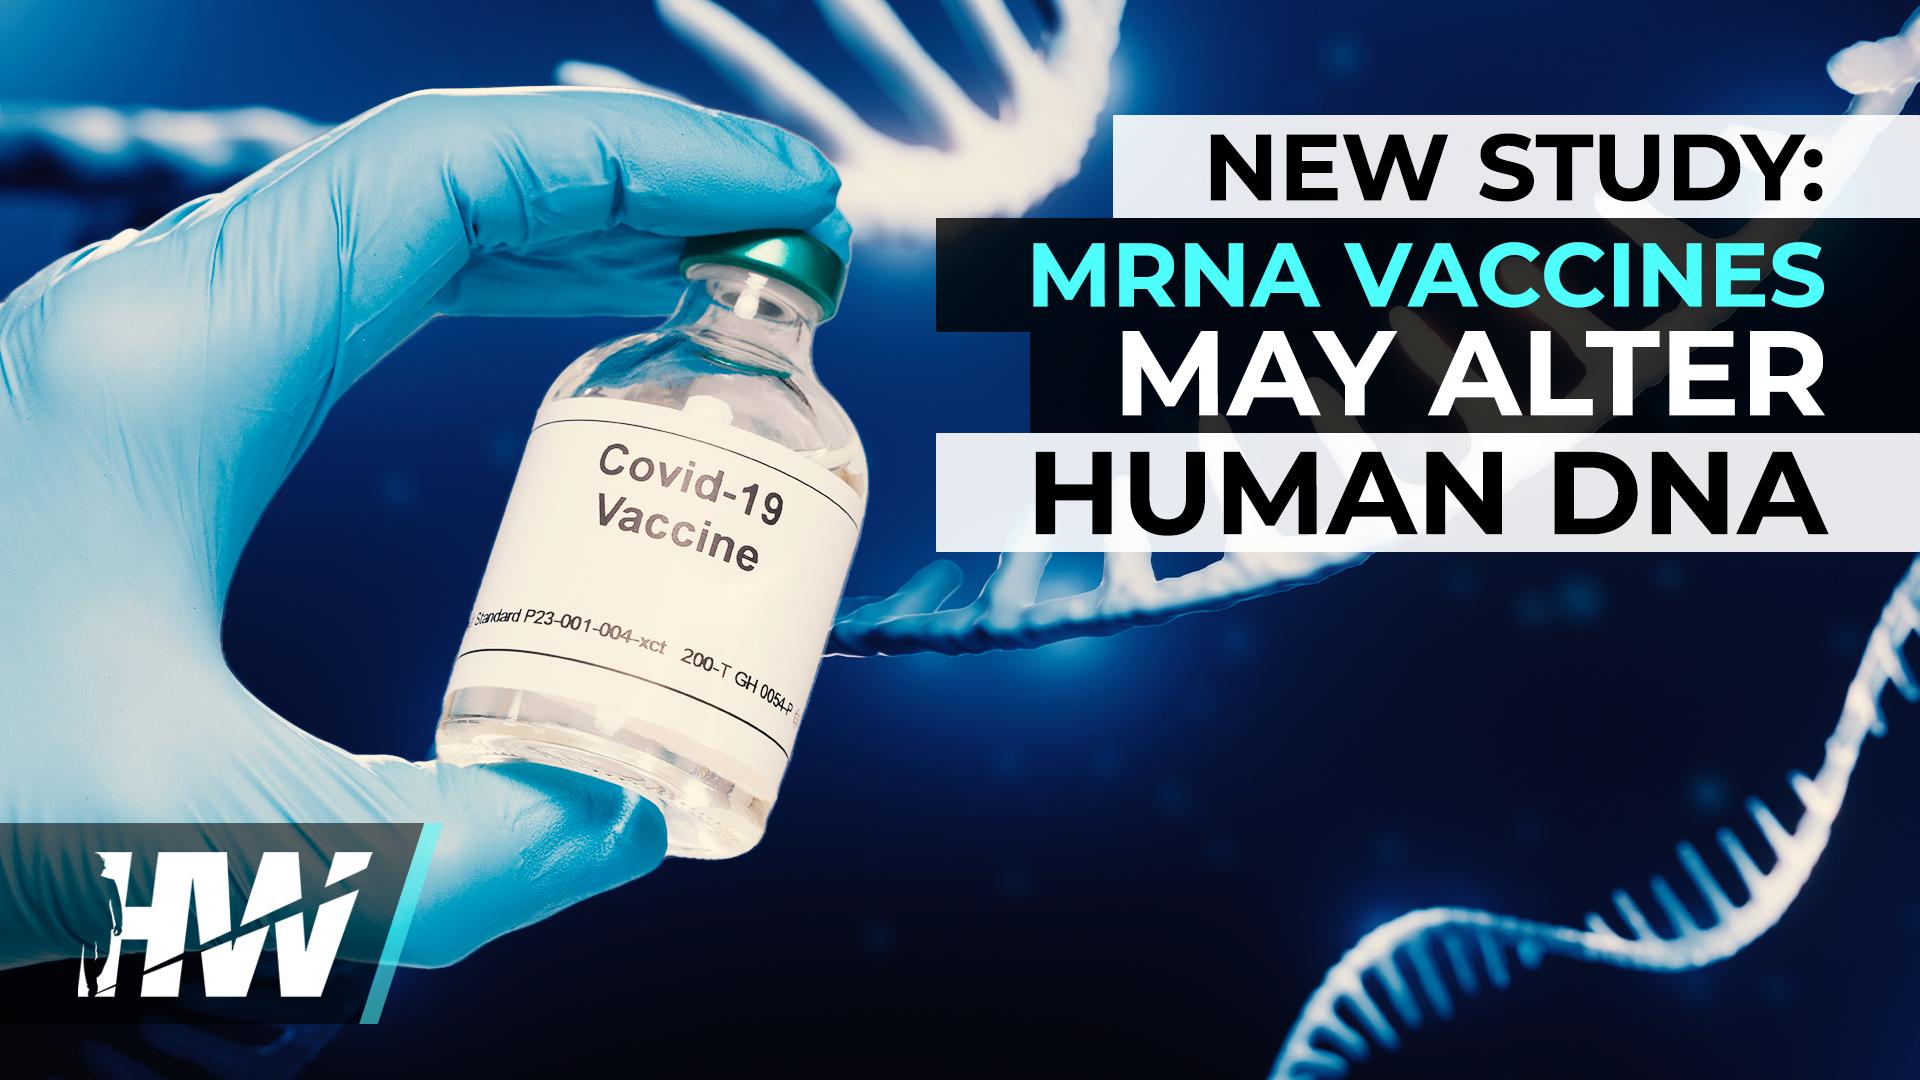 NEW STUDY: MRNA VACCINES MAY ALTER HUMAN DNA